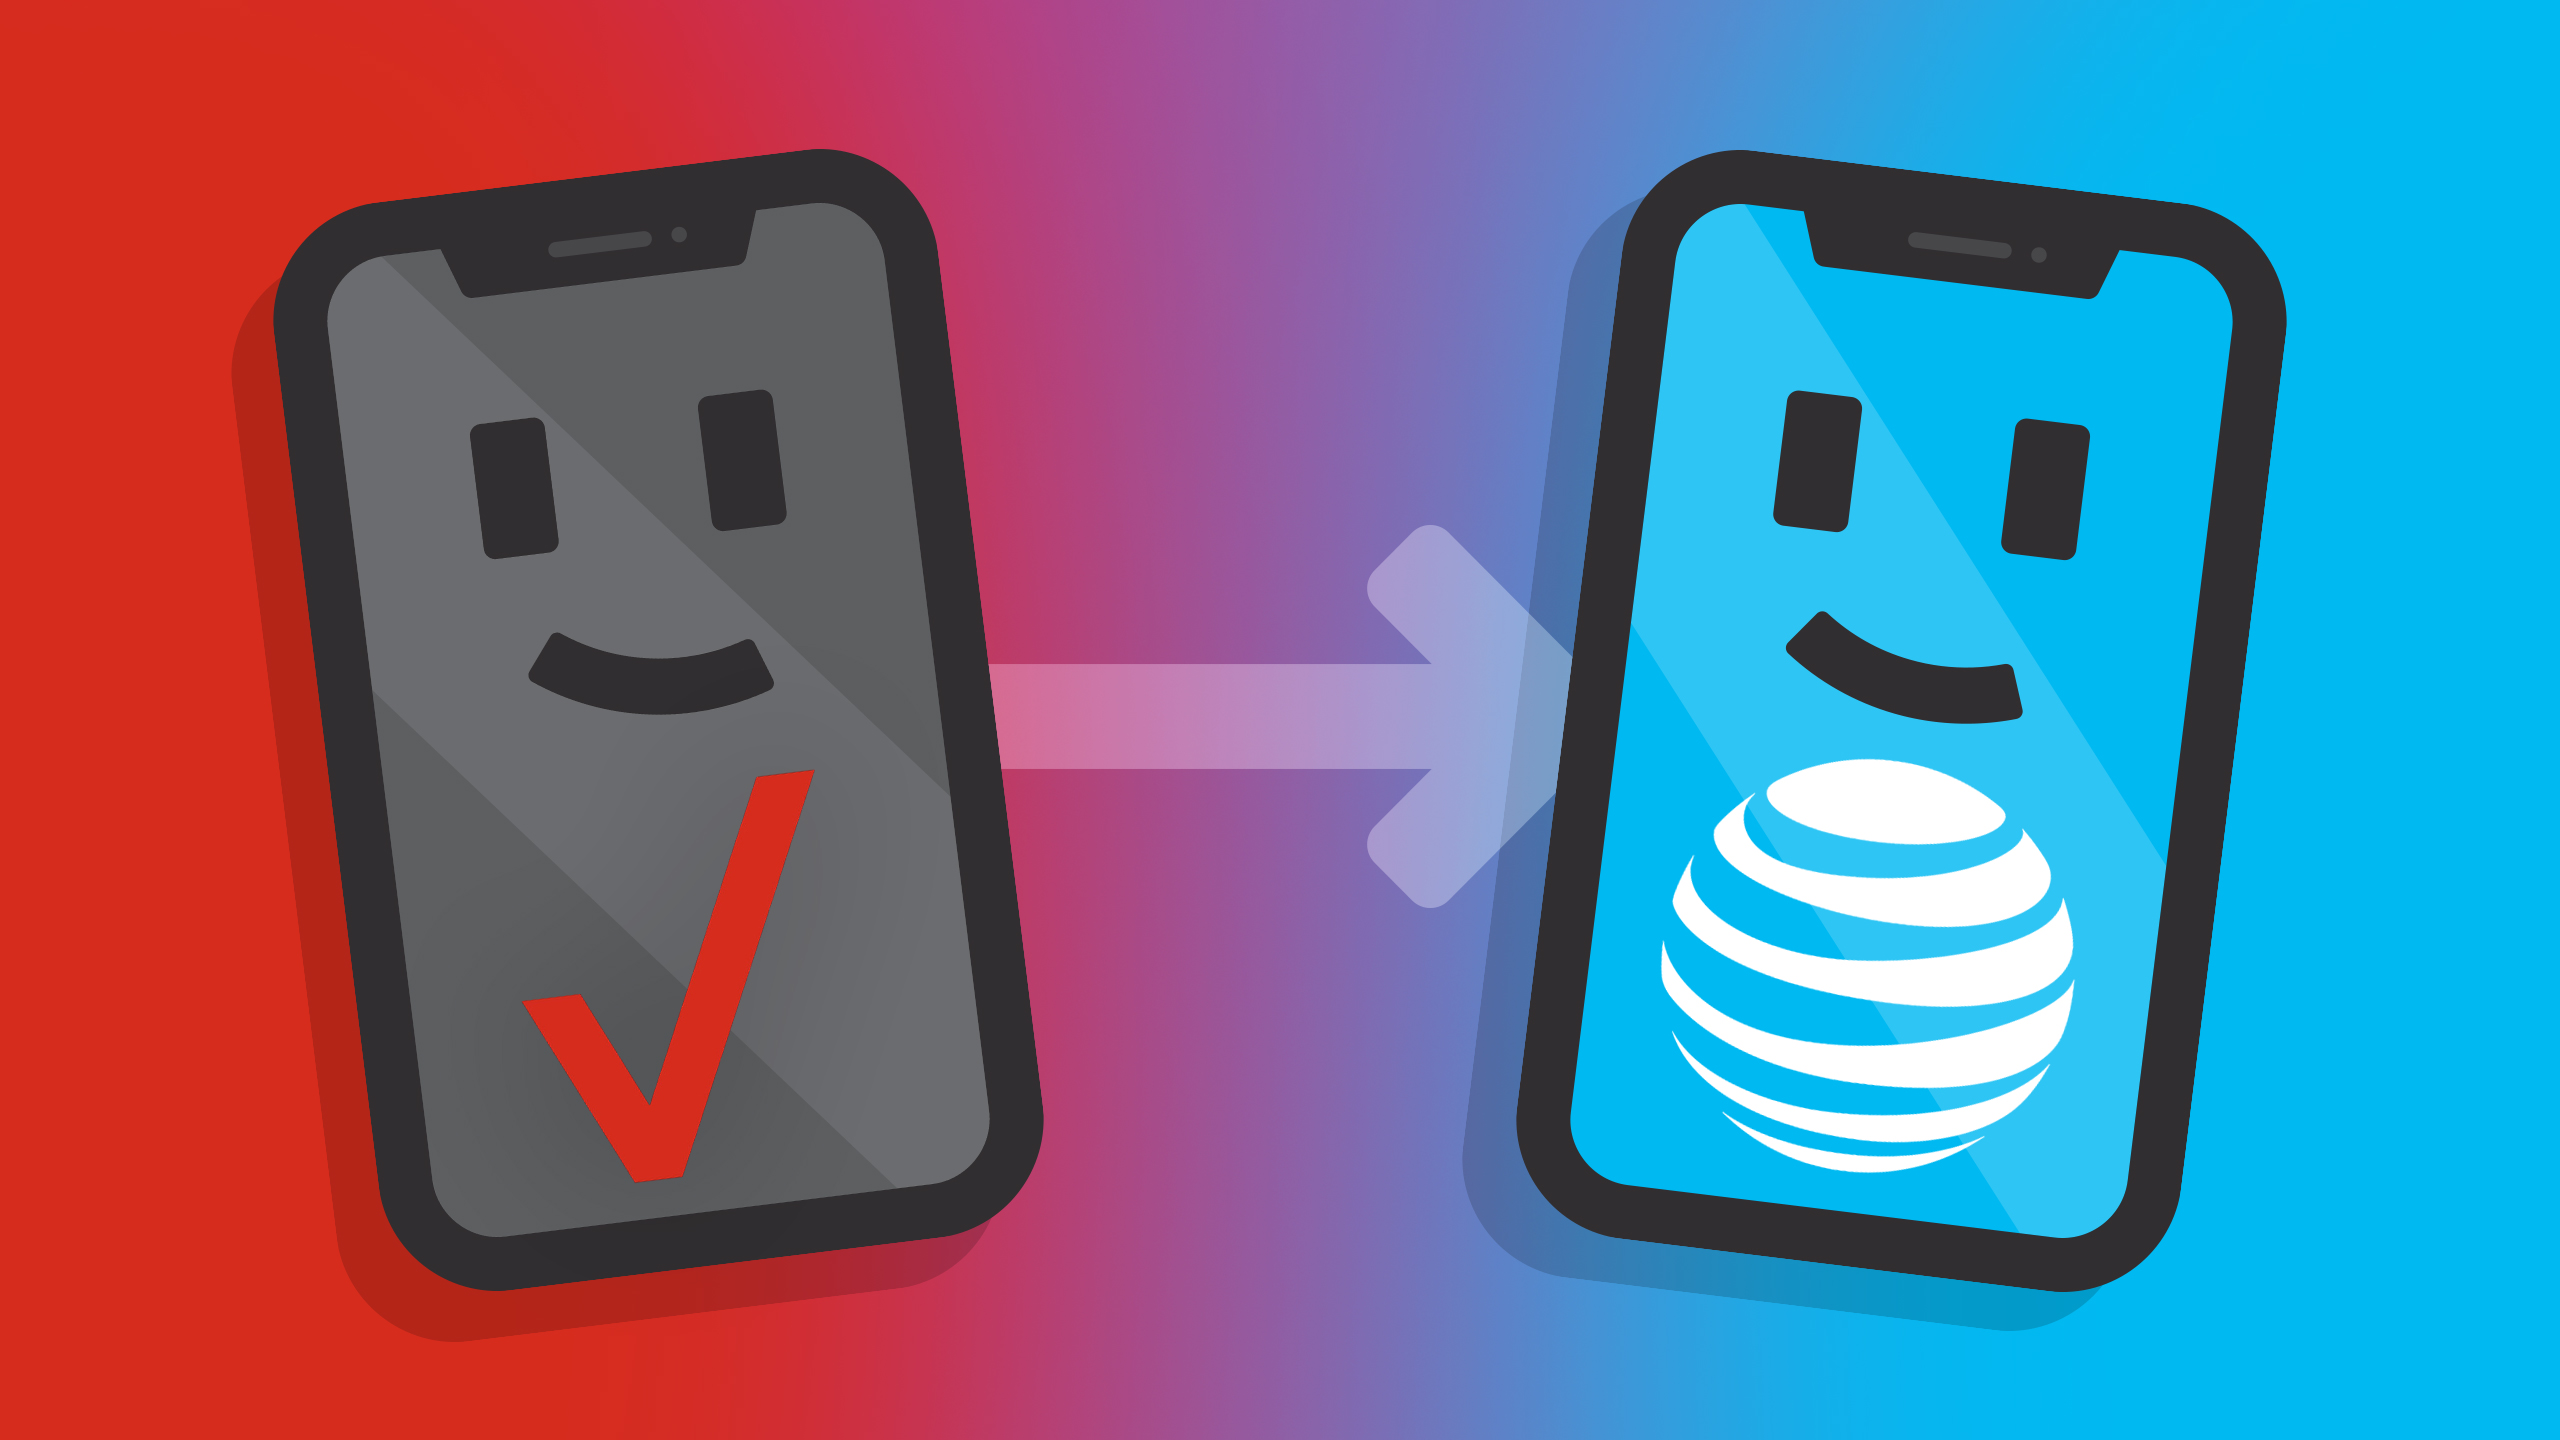 How To Switch From Verizon To AT&T [StepByStep Guide]